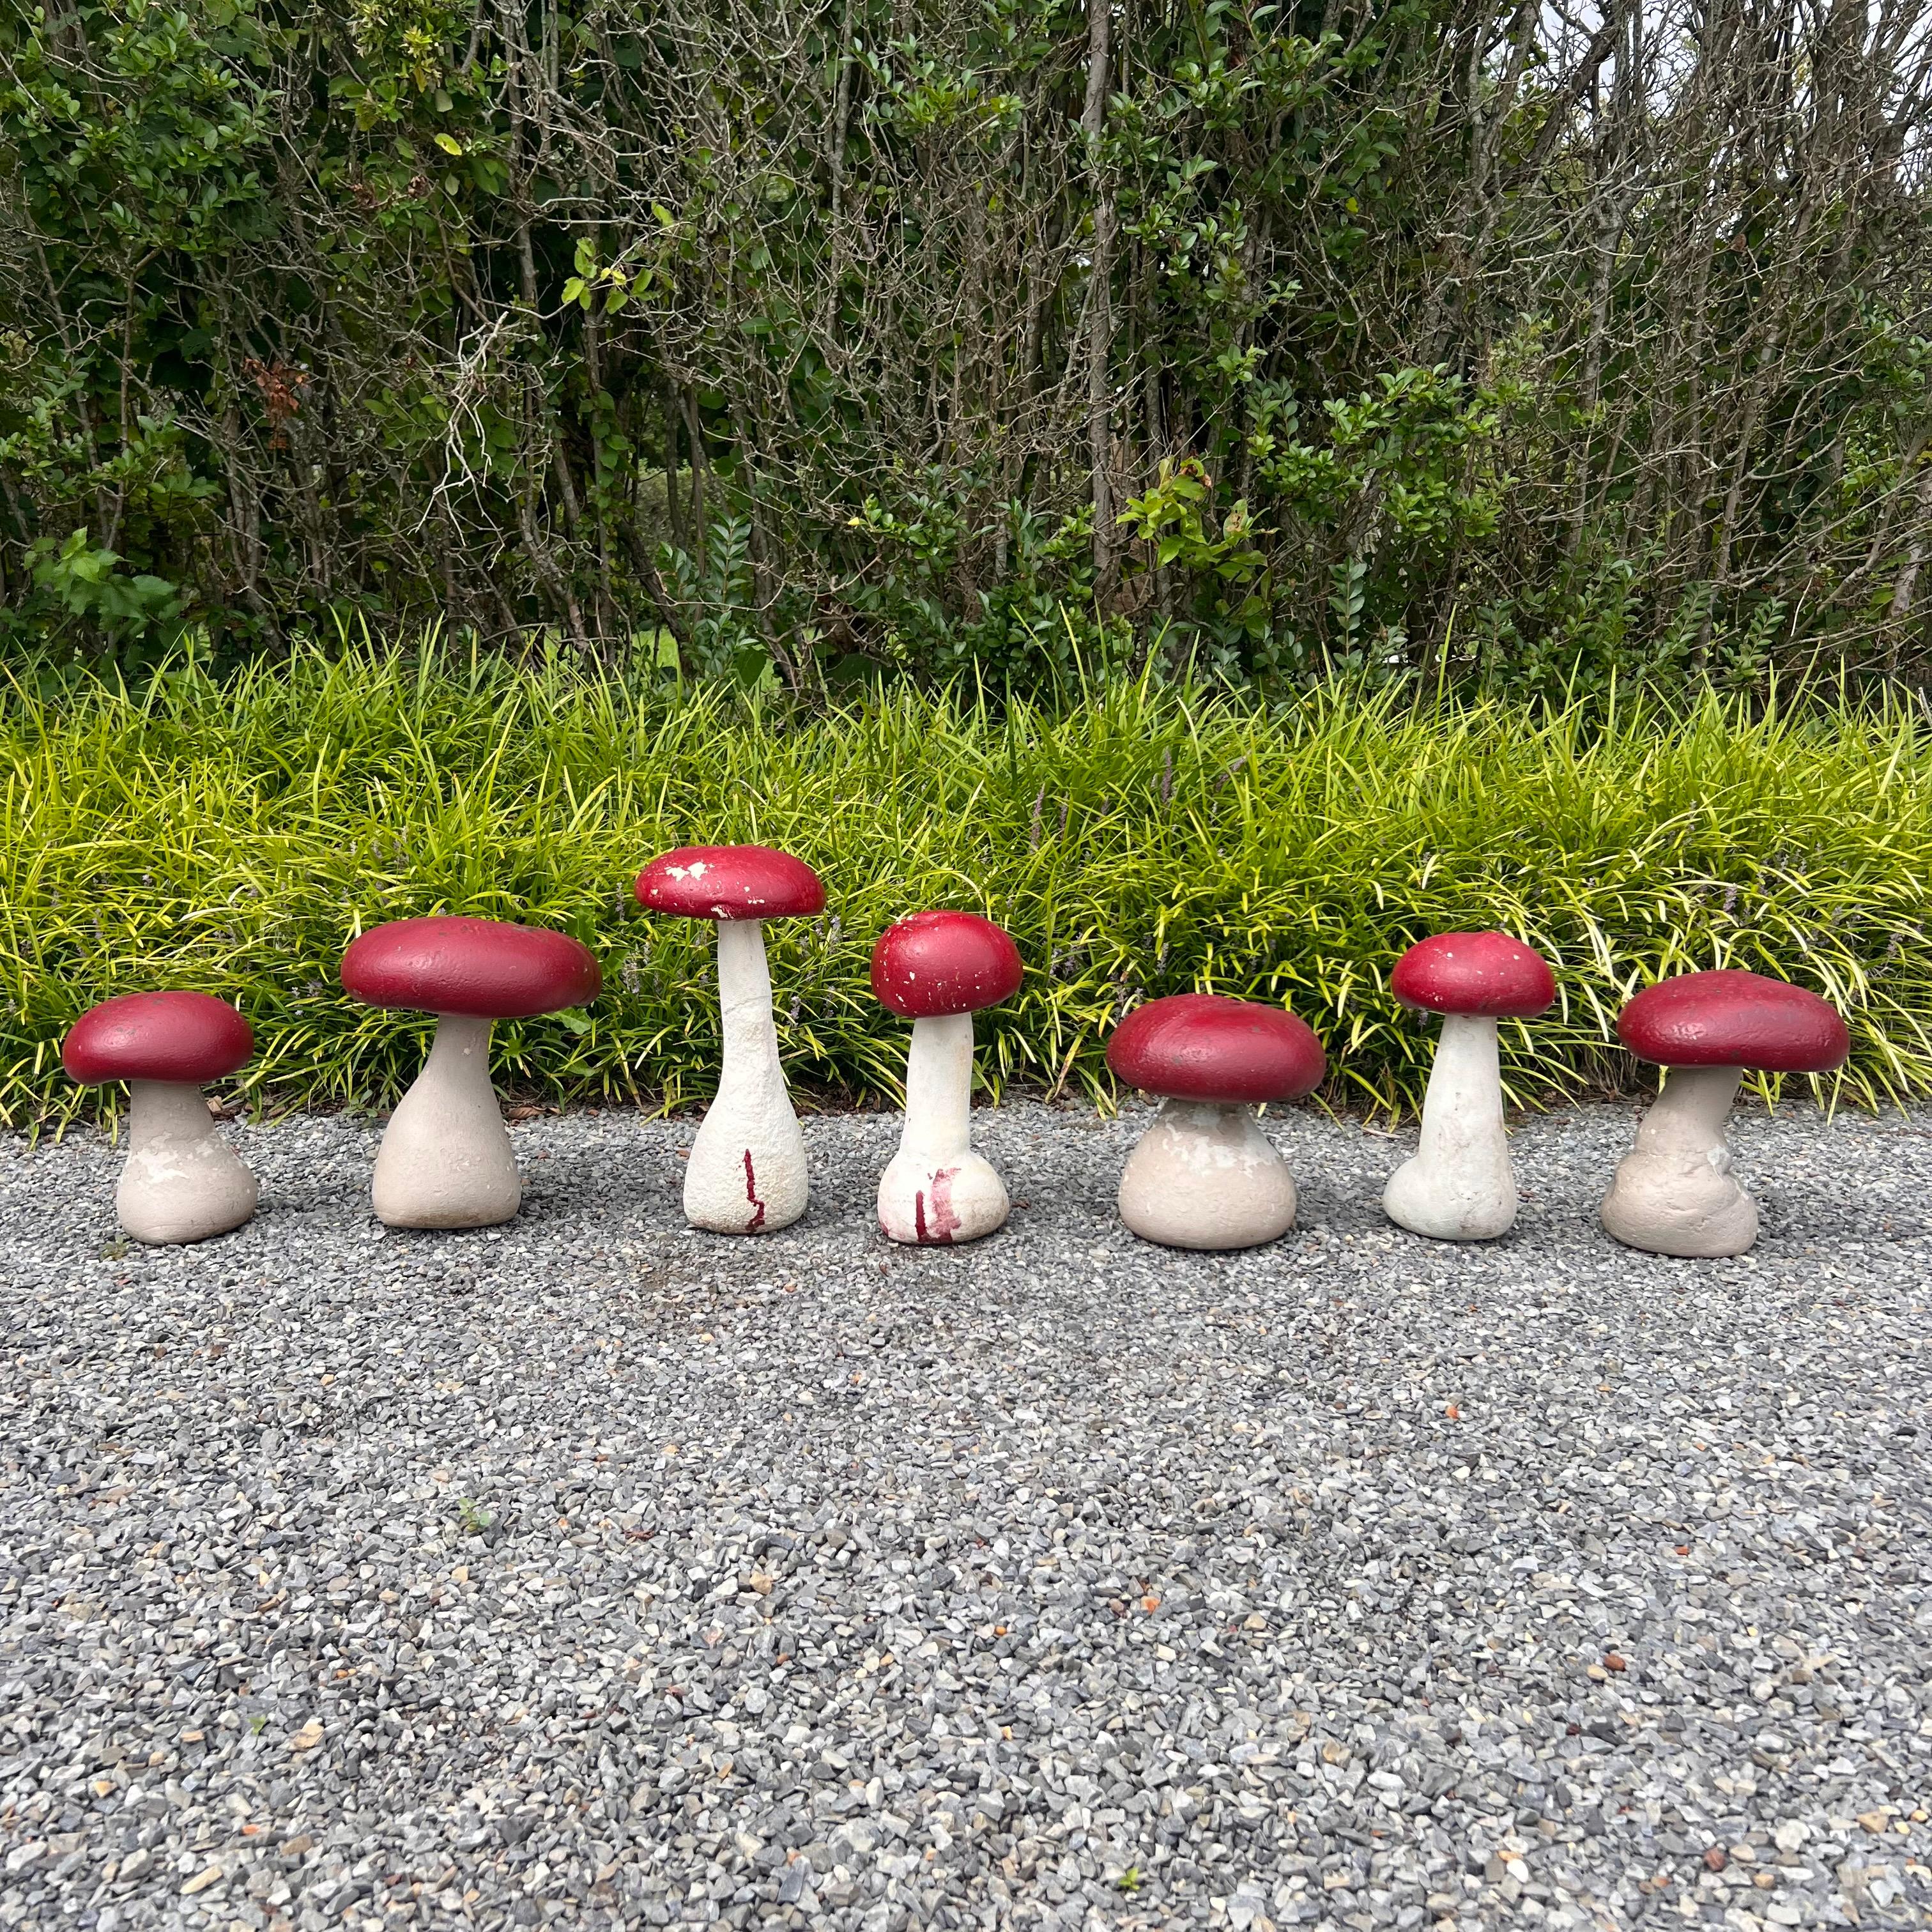 French concrete garden mushrooms, circa 1970s. Great for use outside. Age has given these unique items a light patina. Substantial and well made, these decorative mushrooms are constructed of solid concrete with candy red painted caps. A fun set of